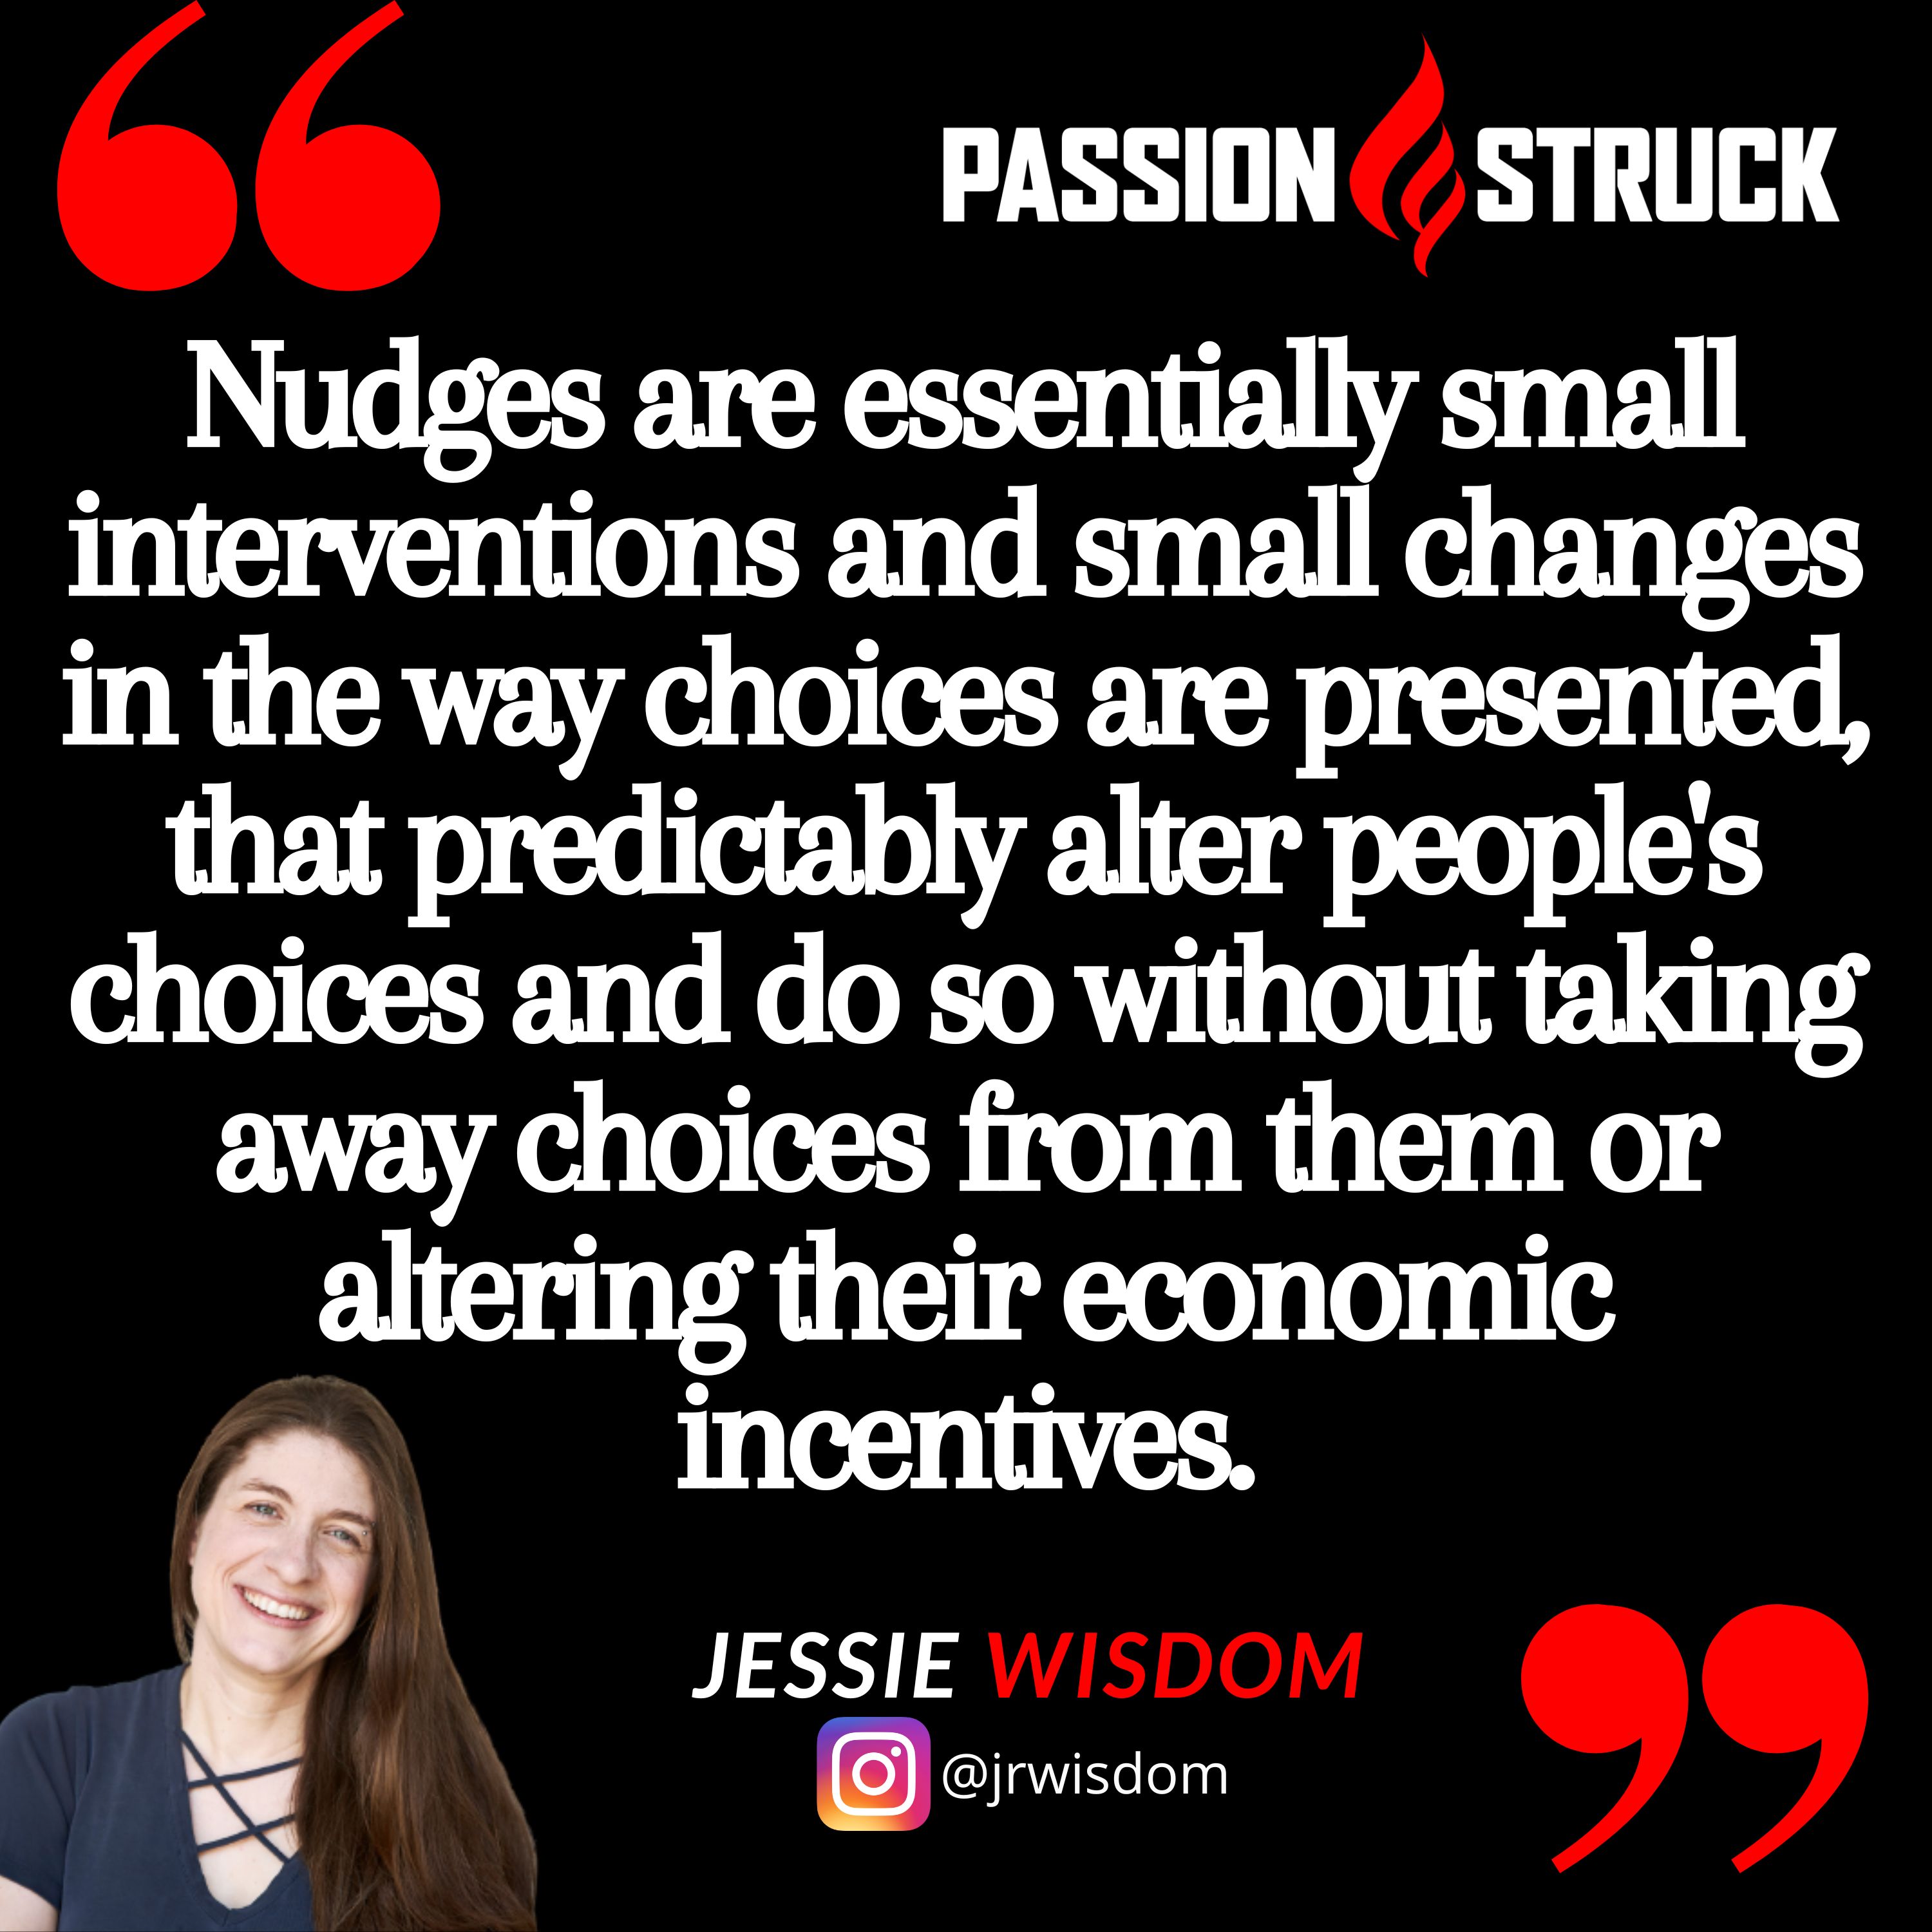 Quote by Jessie Wisdom from the passion struck podcast on nudges